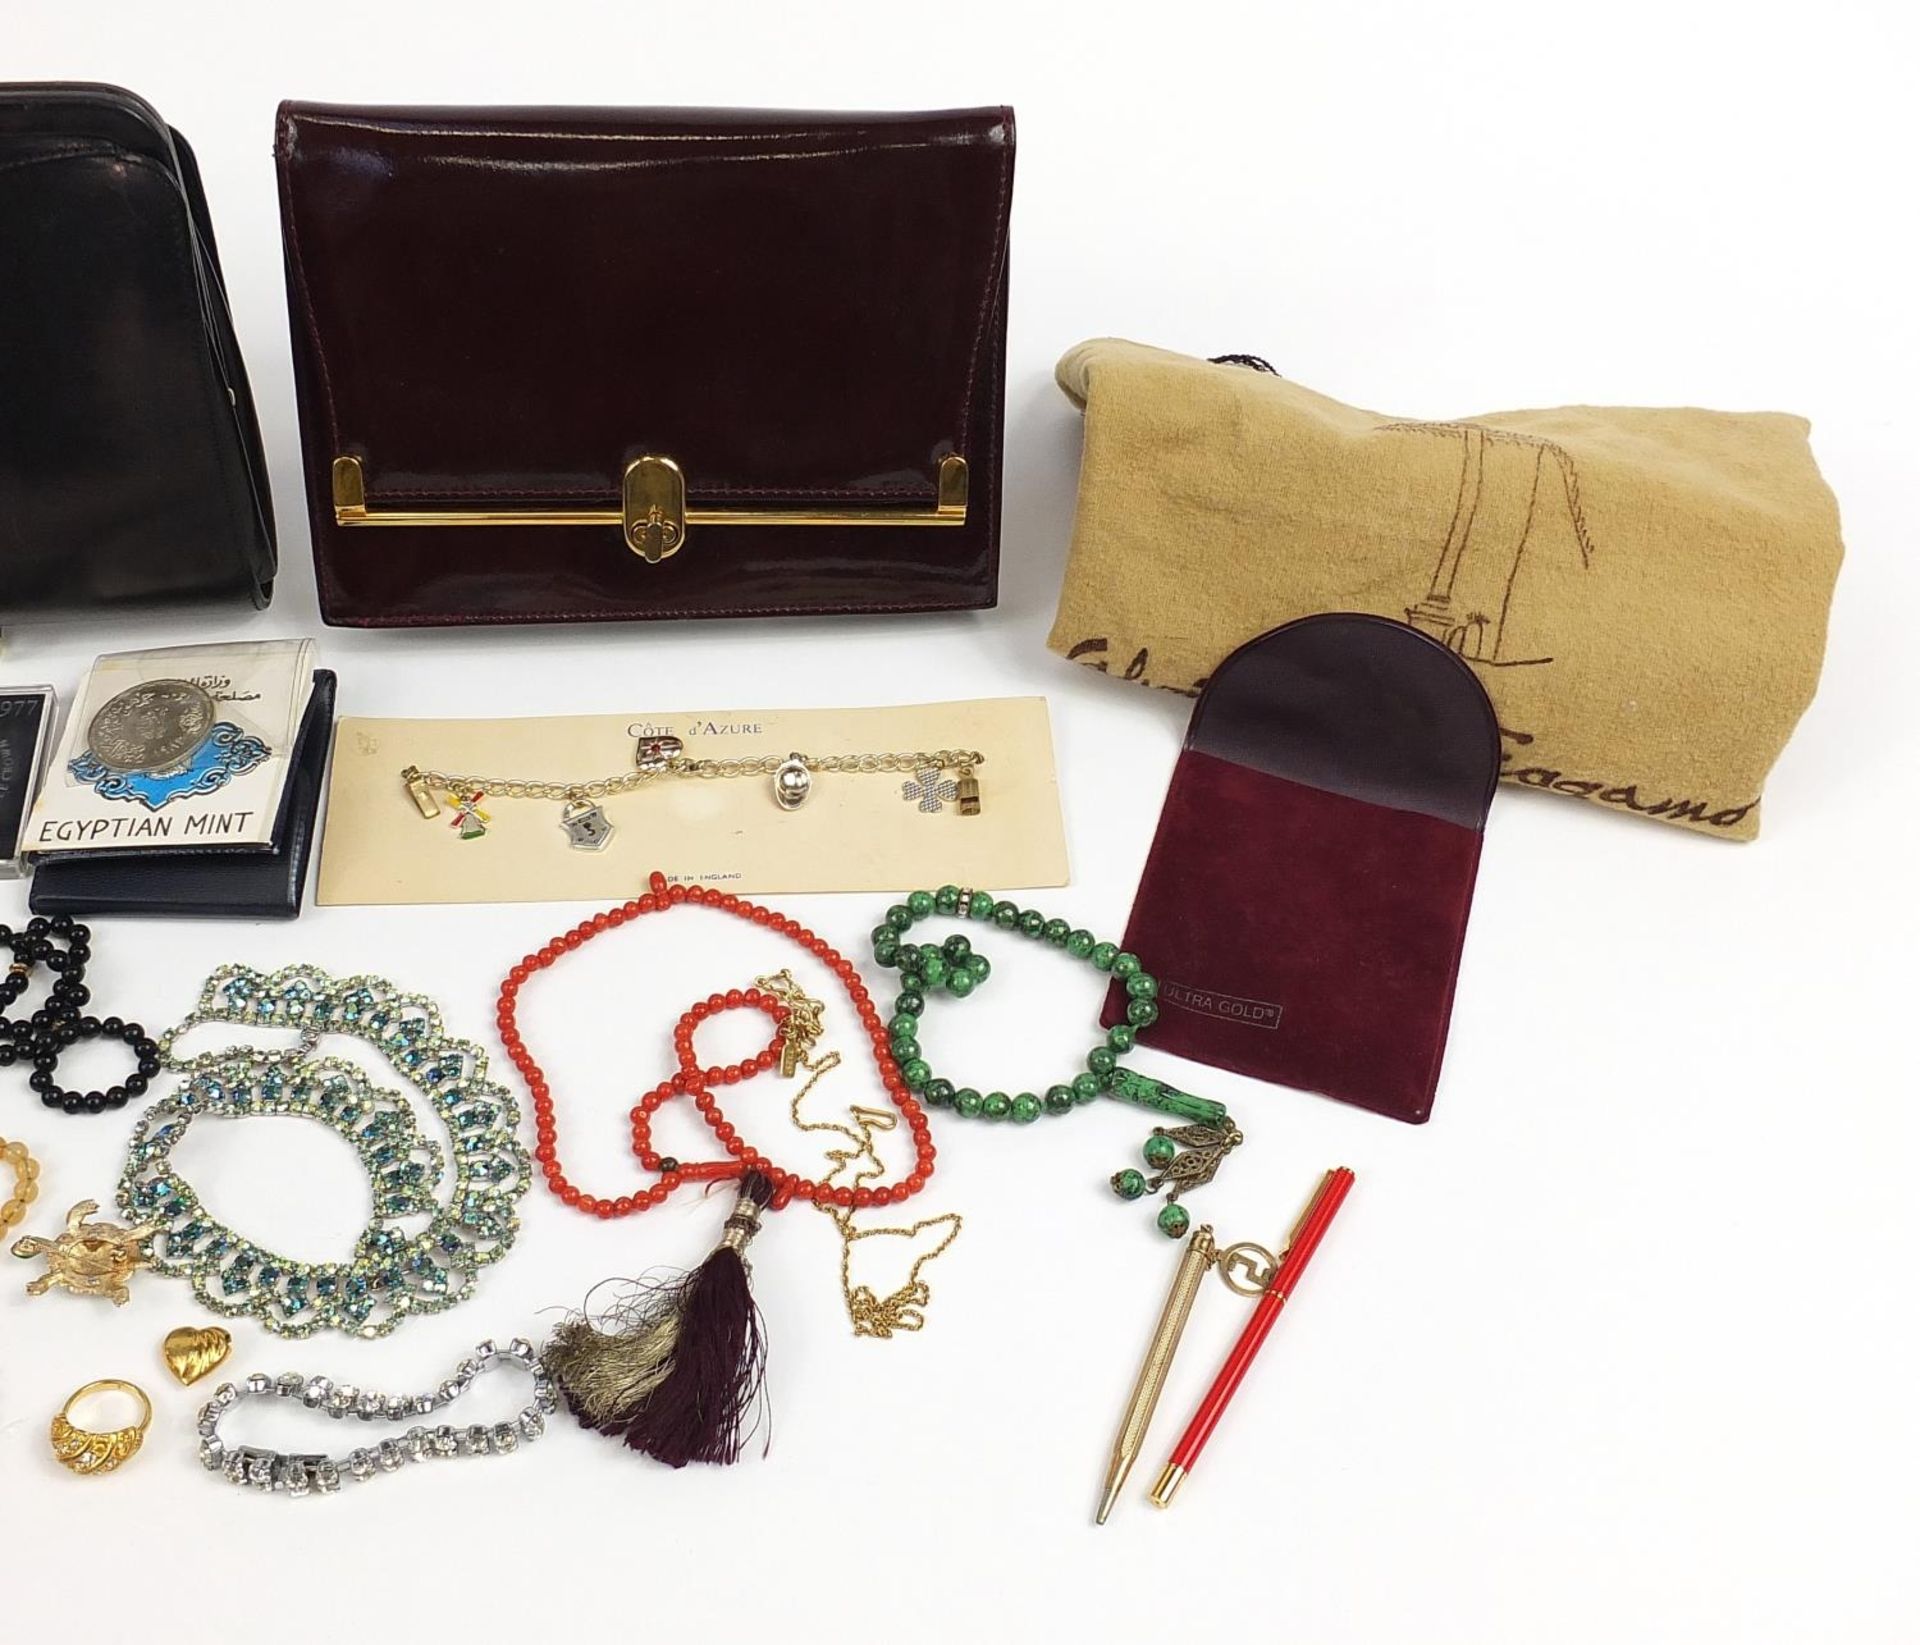 Costume jewellery and sundry items including amber coloured cheroot, ladies clutch bags, AA car - Image 8 of 10